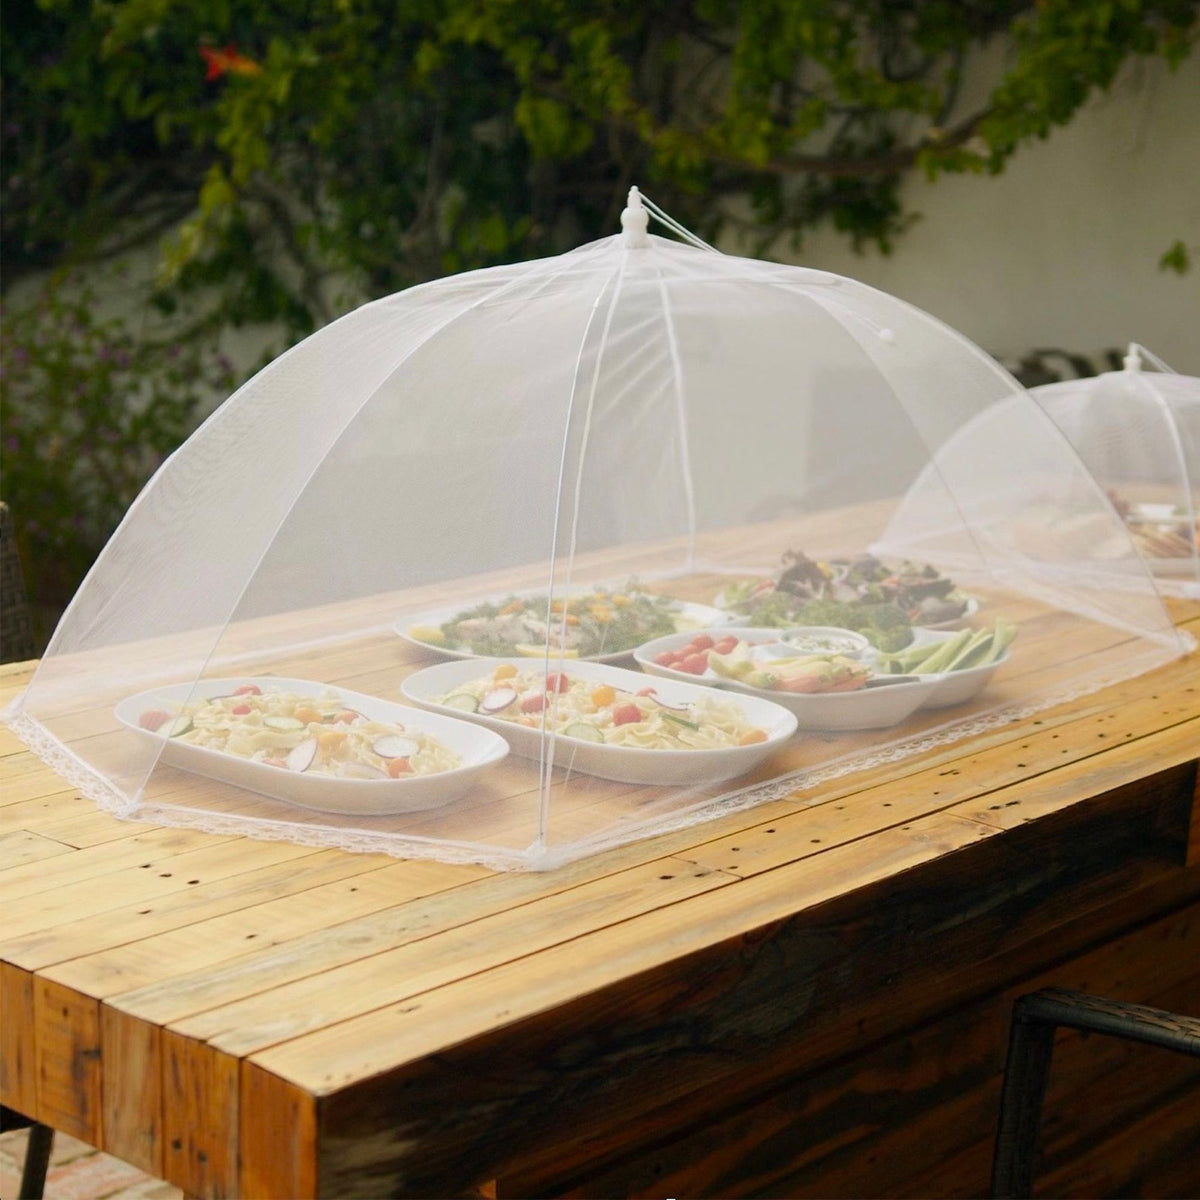 6pk Pop-Up 47x26" Jumbo Outdoor Food Tent Covers - Keep Bugs Out